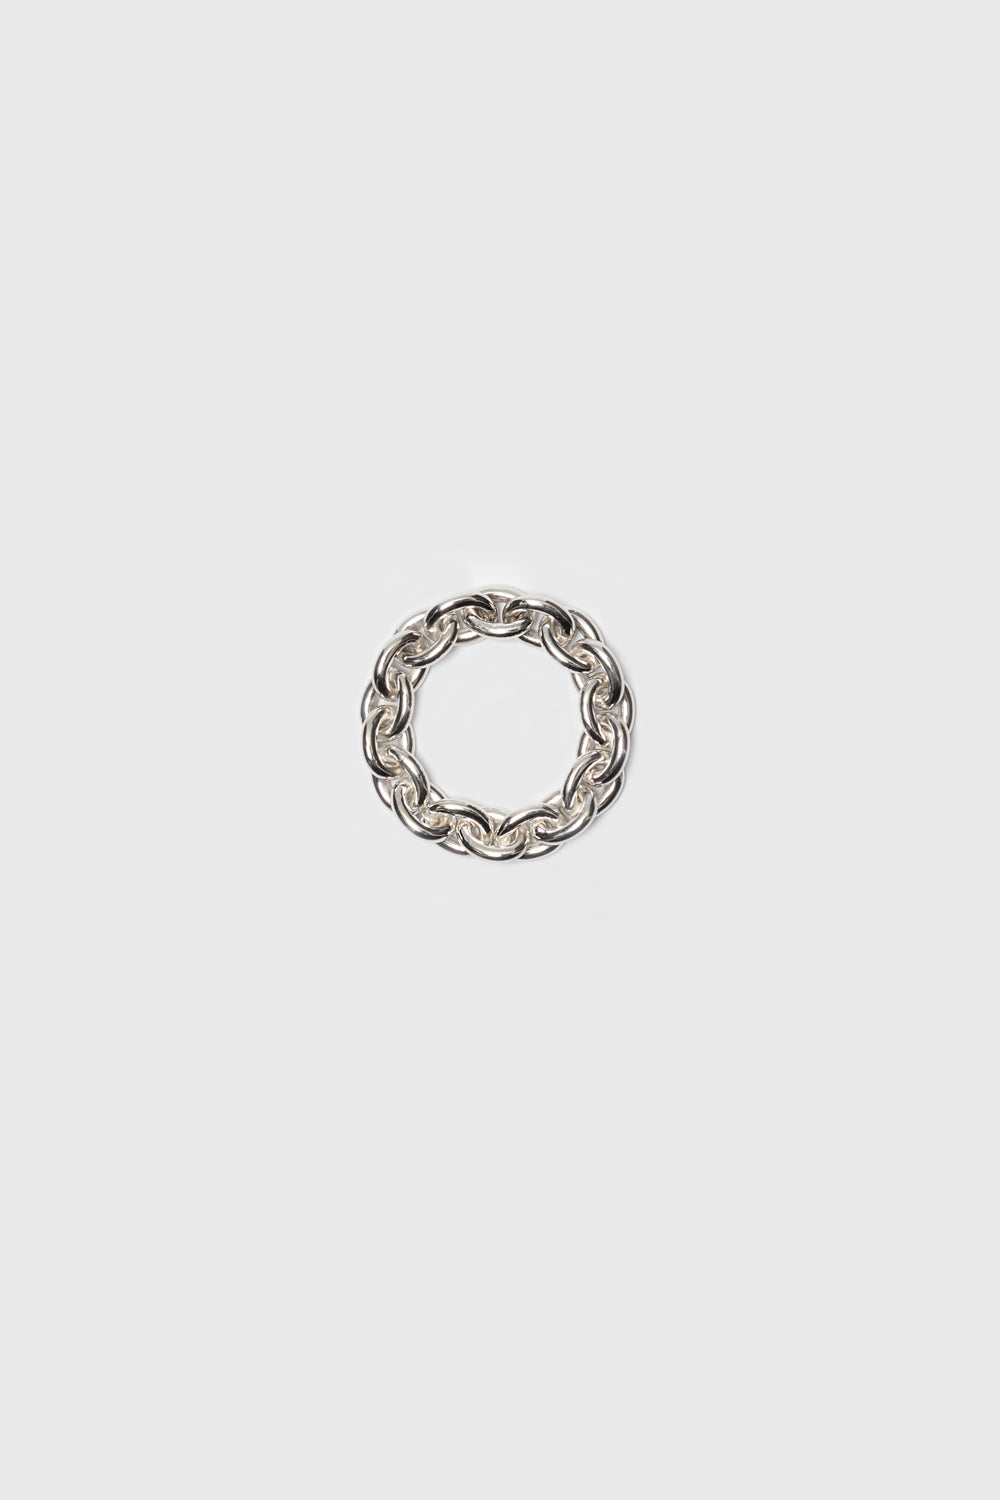 Flexible chain ring with a high gloss finish. Silver jewelry handmade in Berlin.